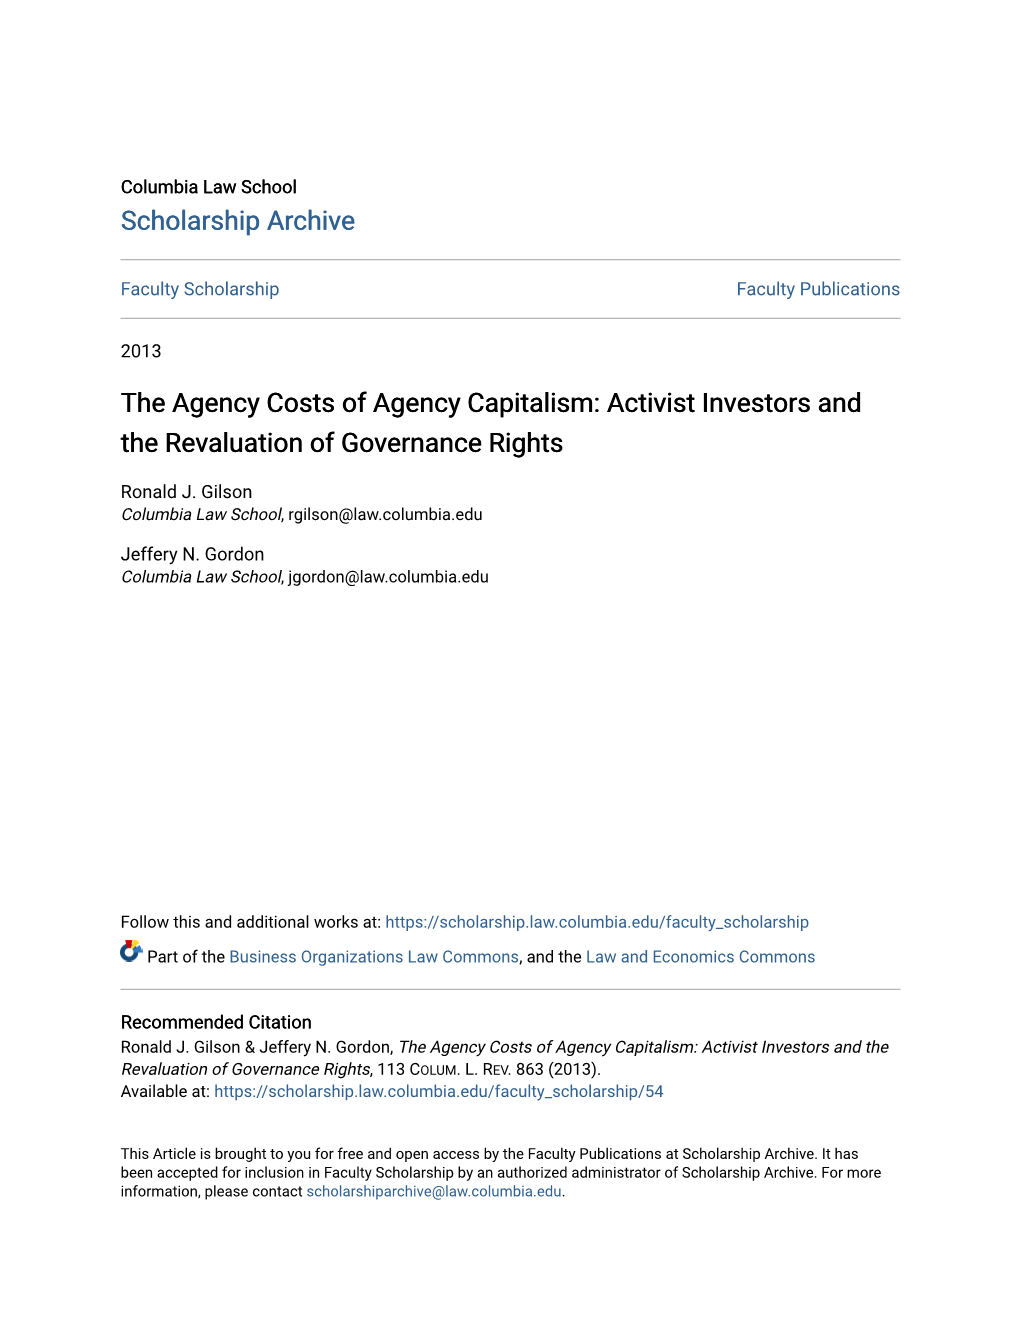 Activist Investors and the Revaluation of Governance Rights